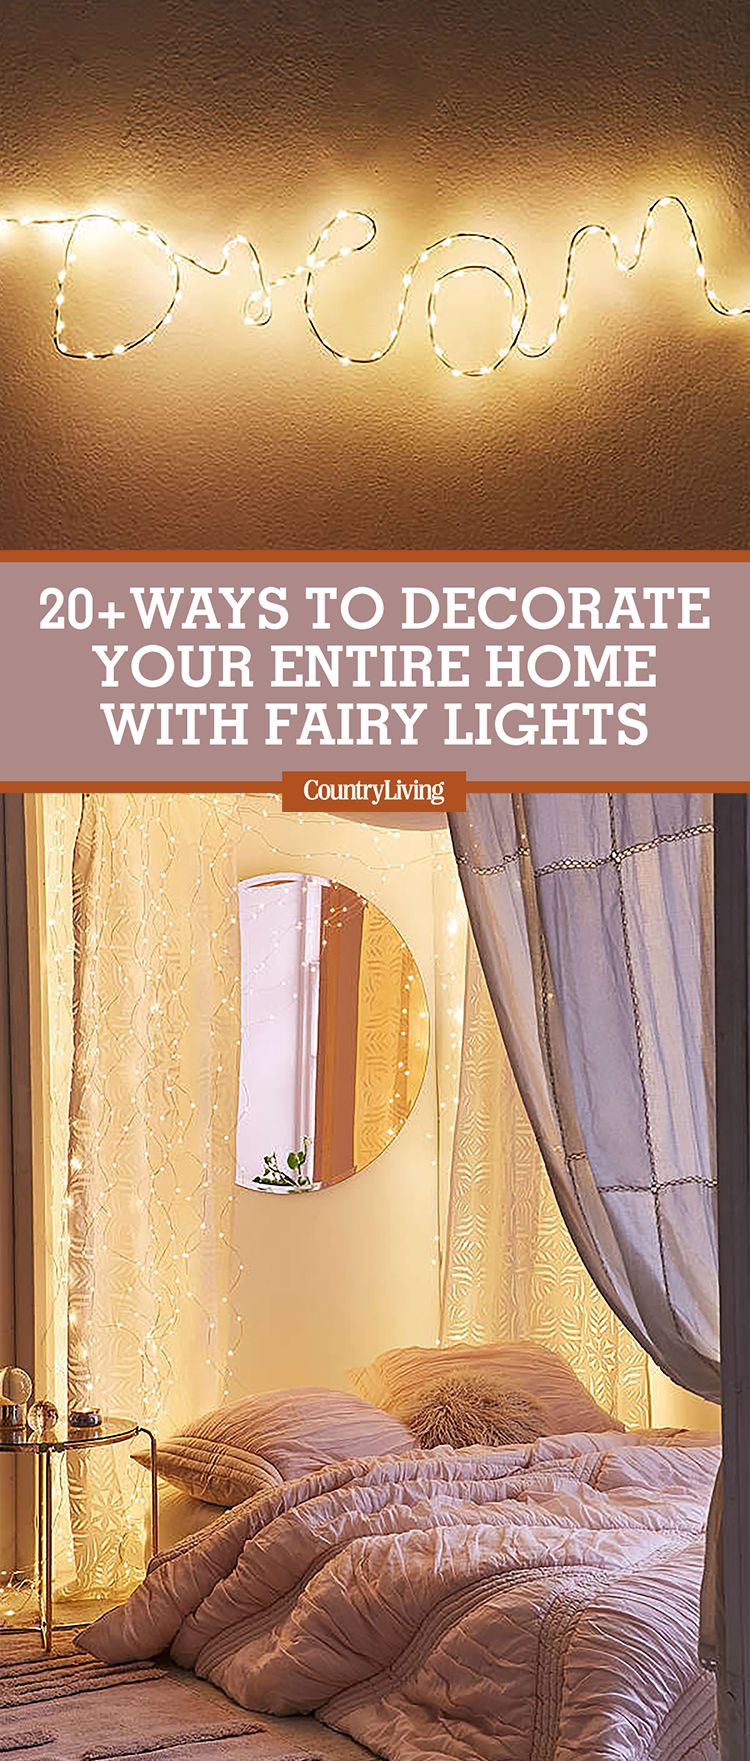 24 Ways To Decorate Your Home With Christmas Lights Decorating Ideas With Led Lights,Thanksgiving Vegetable Side Dishes